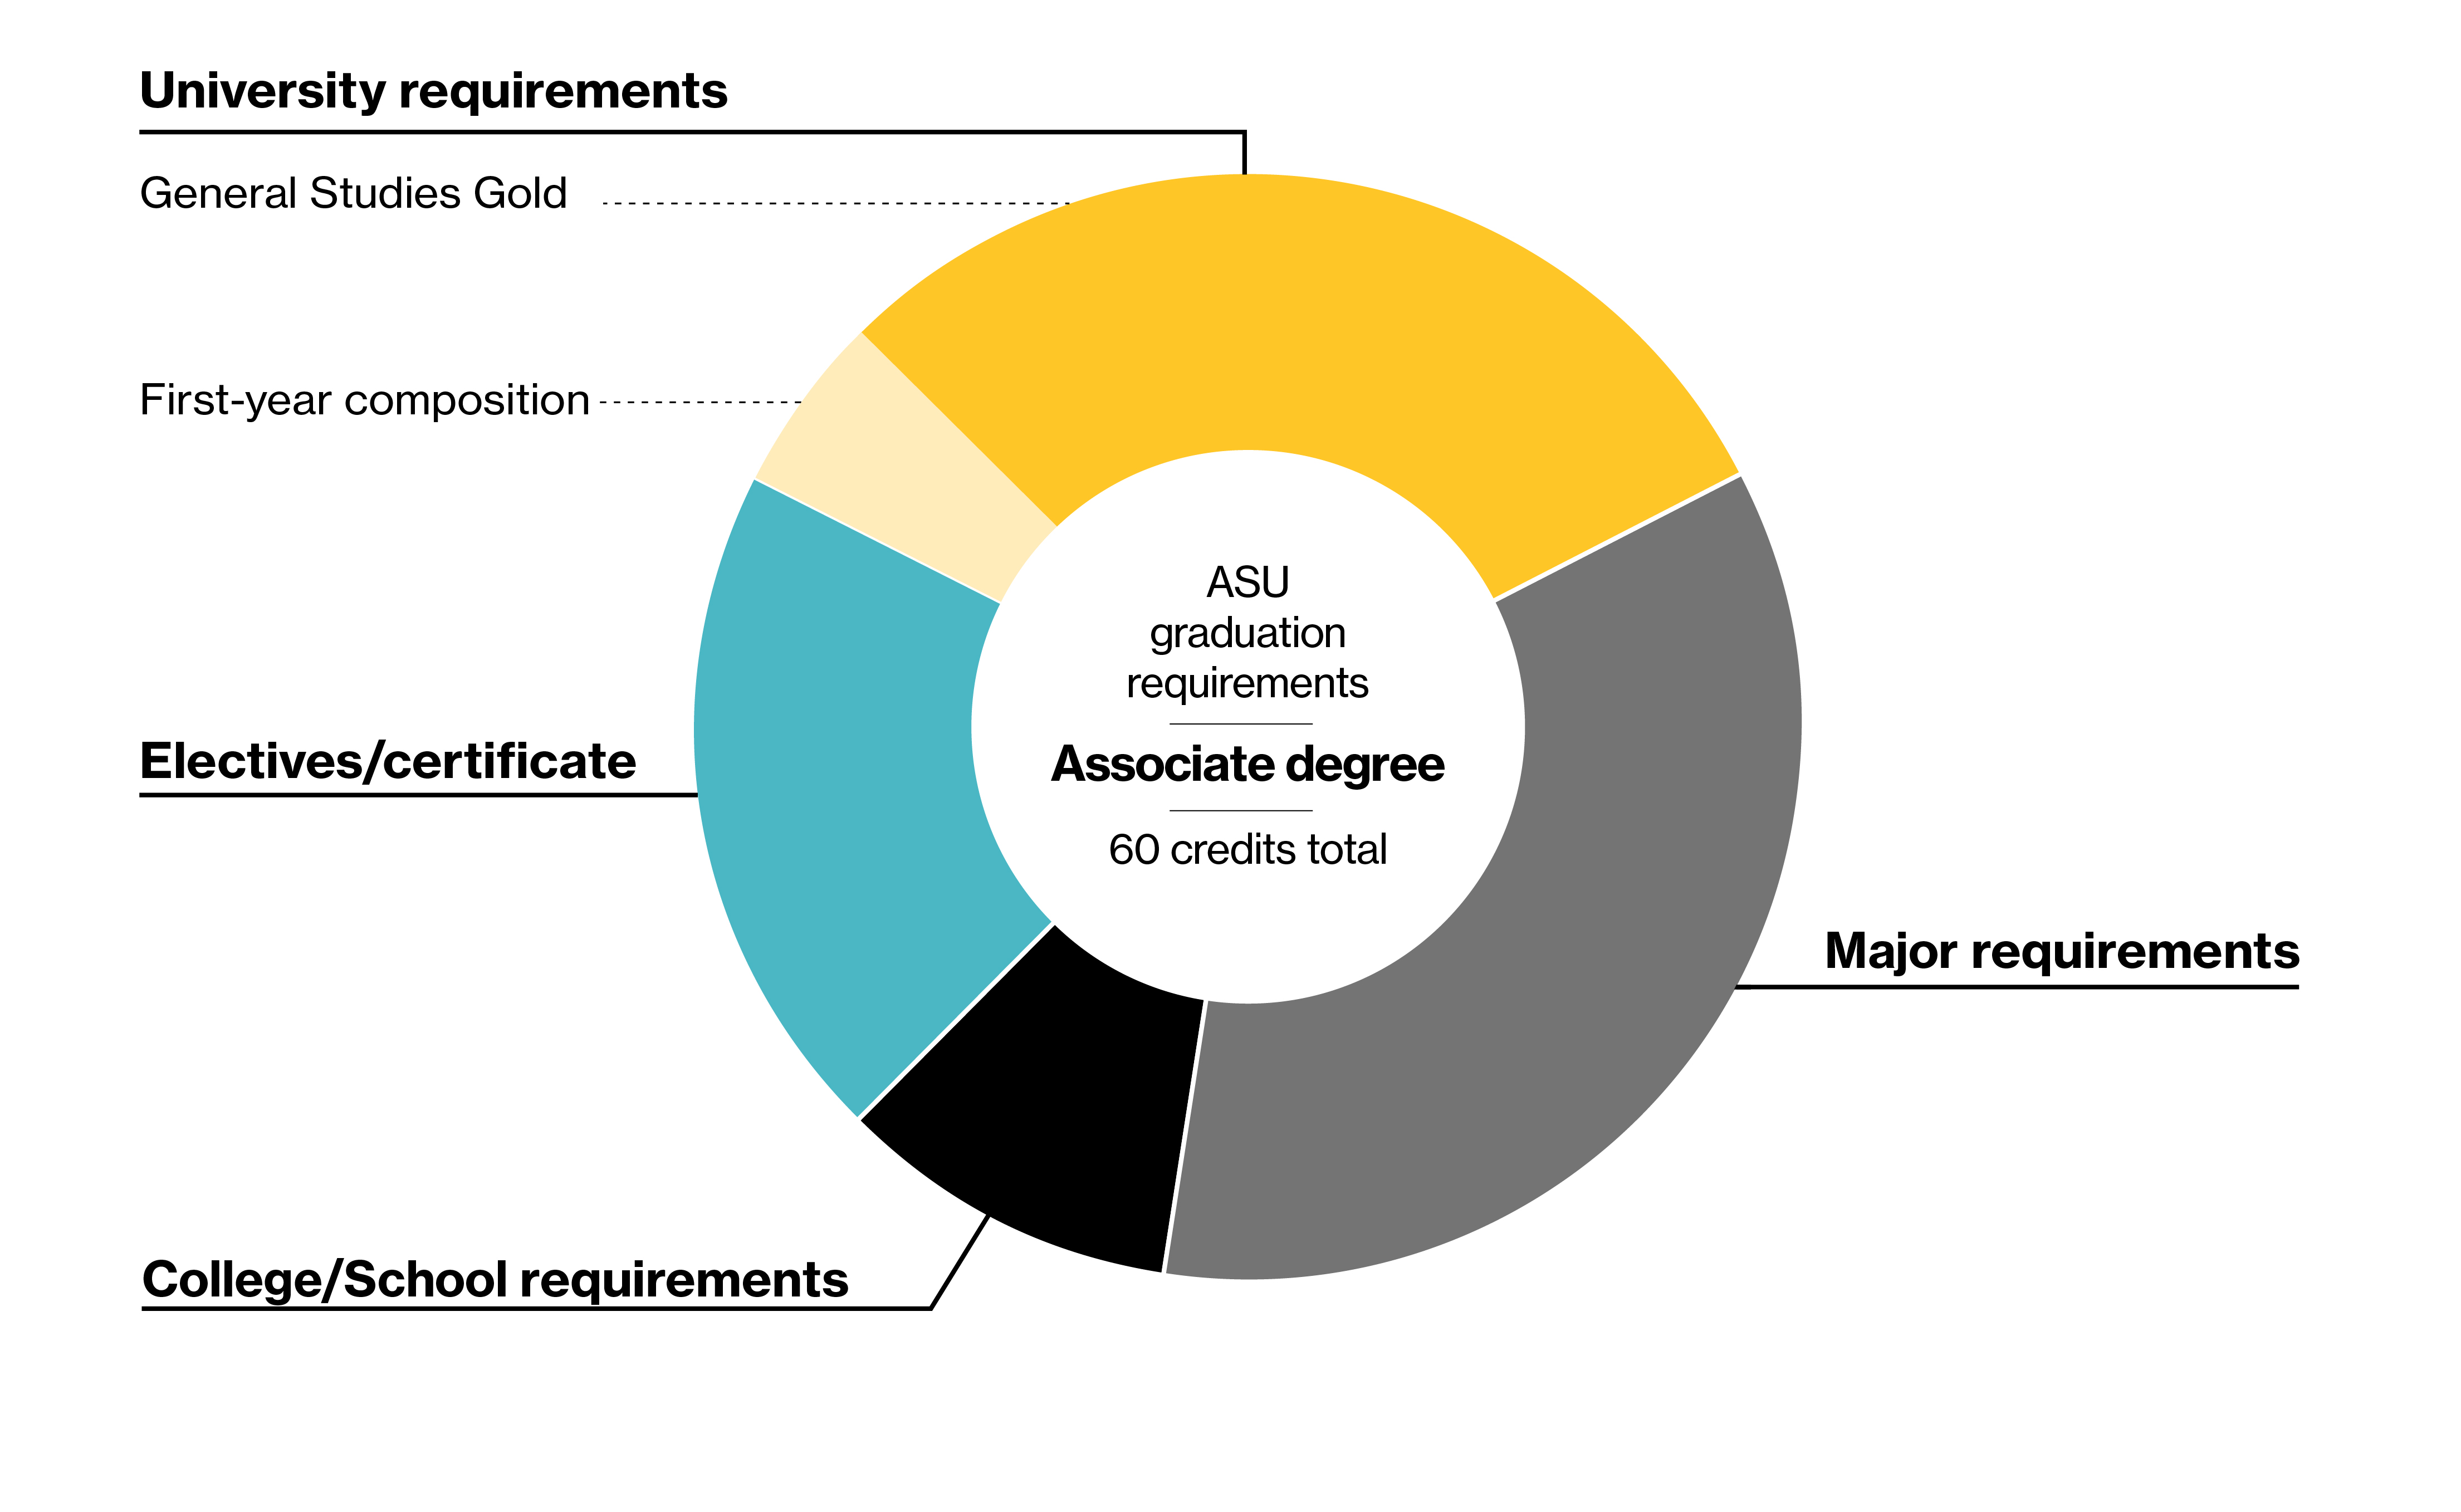 Graphic depicting the breakdown of 60 credits into general studies, major and college requirements, and elective/certificate requirements